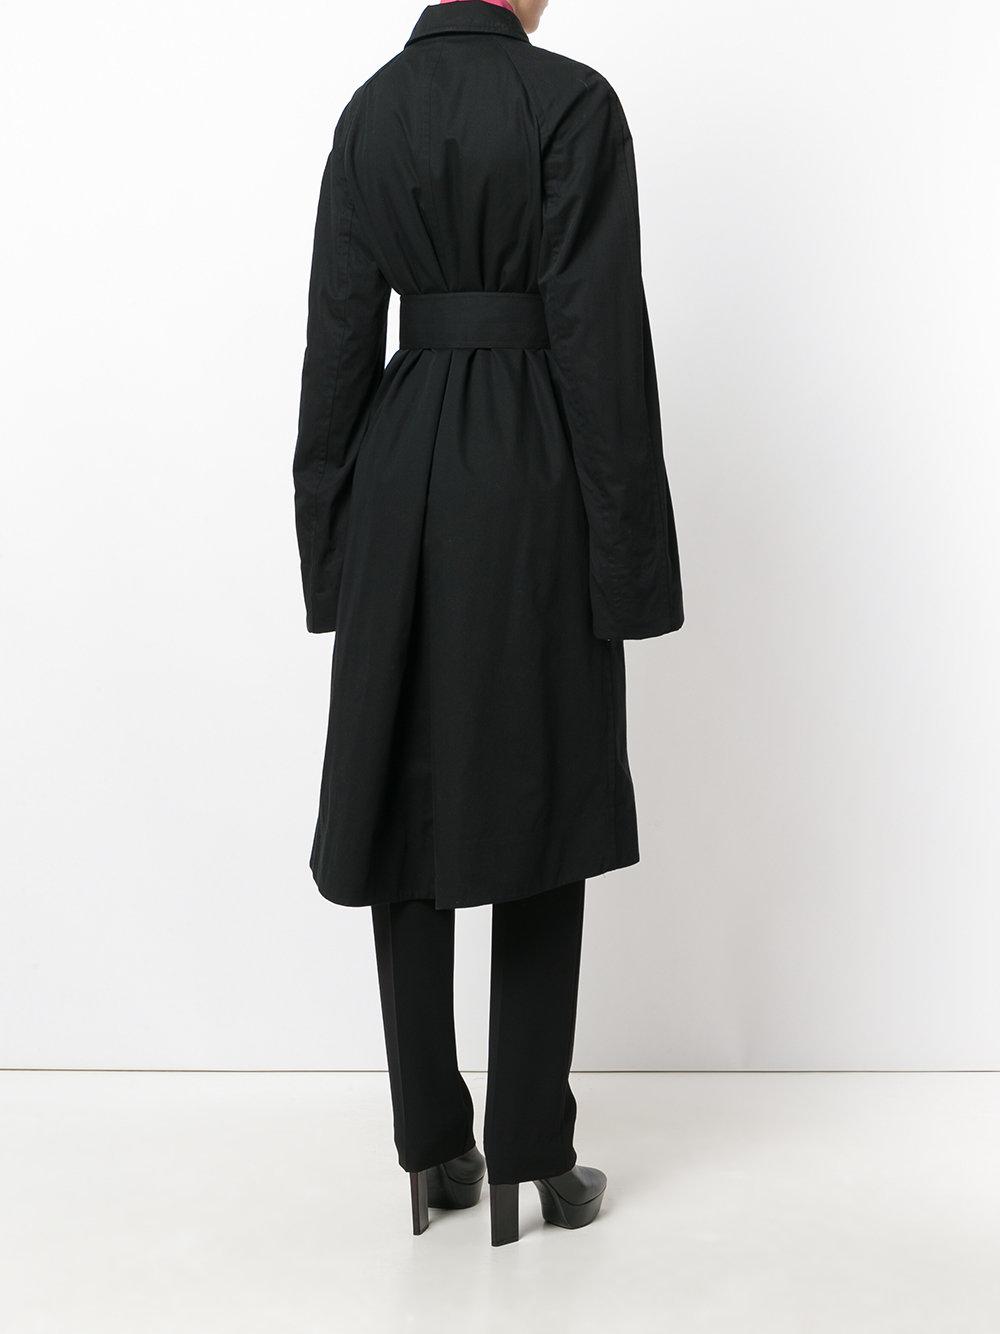 Lemaire Belted Wrap Coat in Black - Lyst